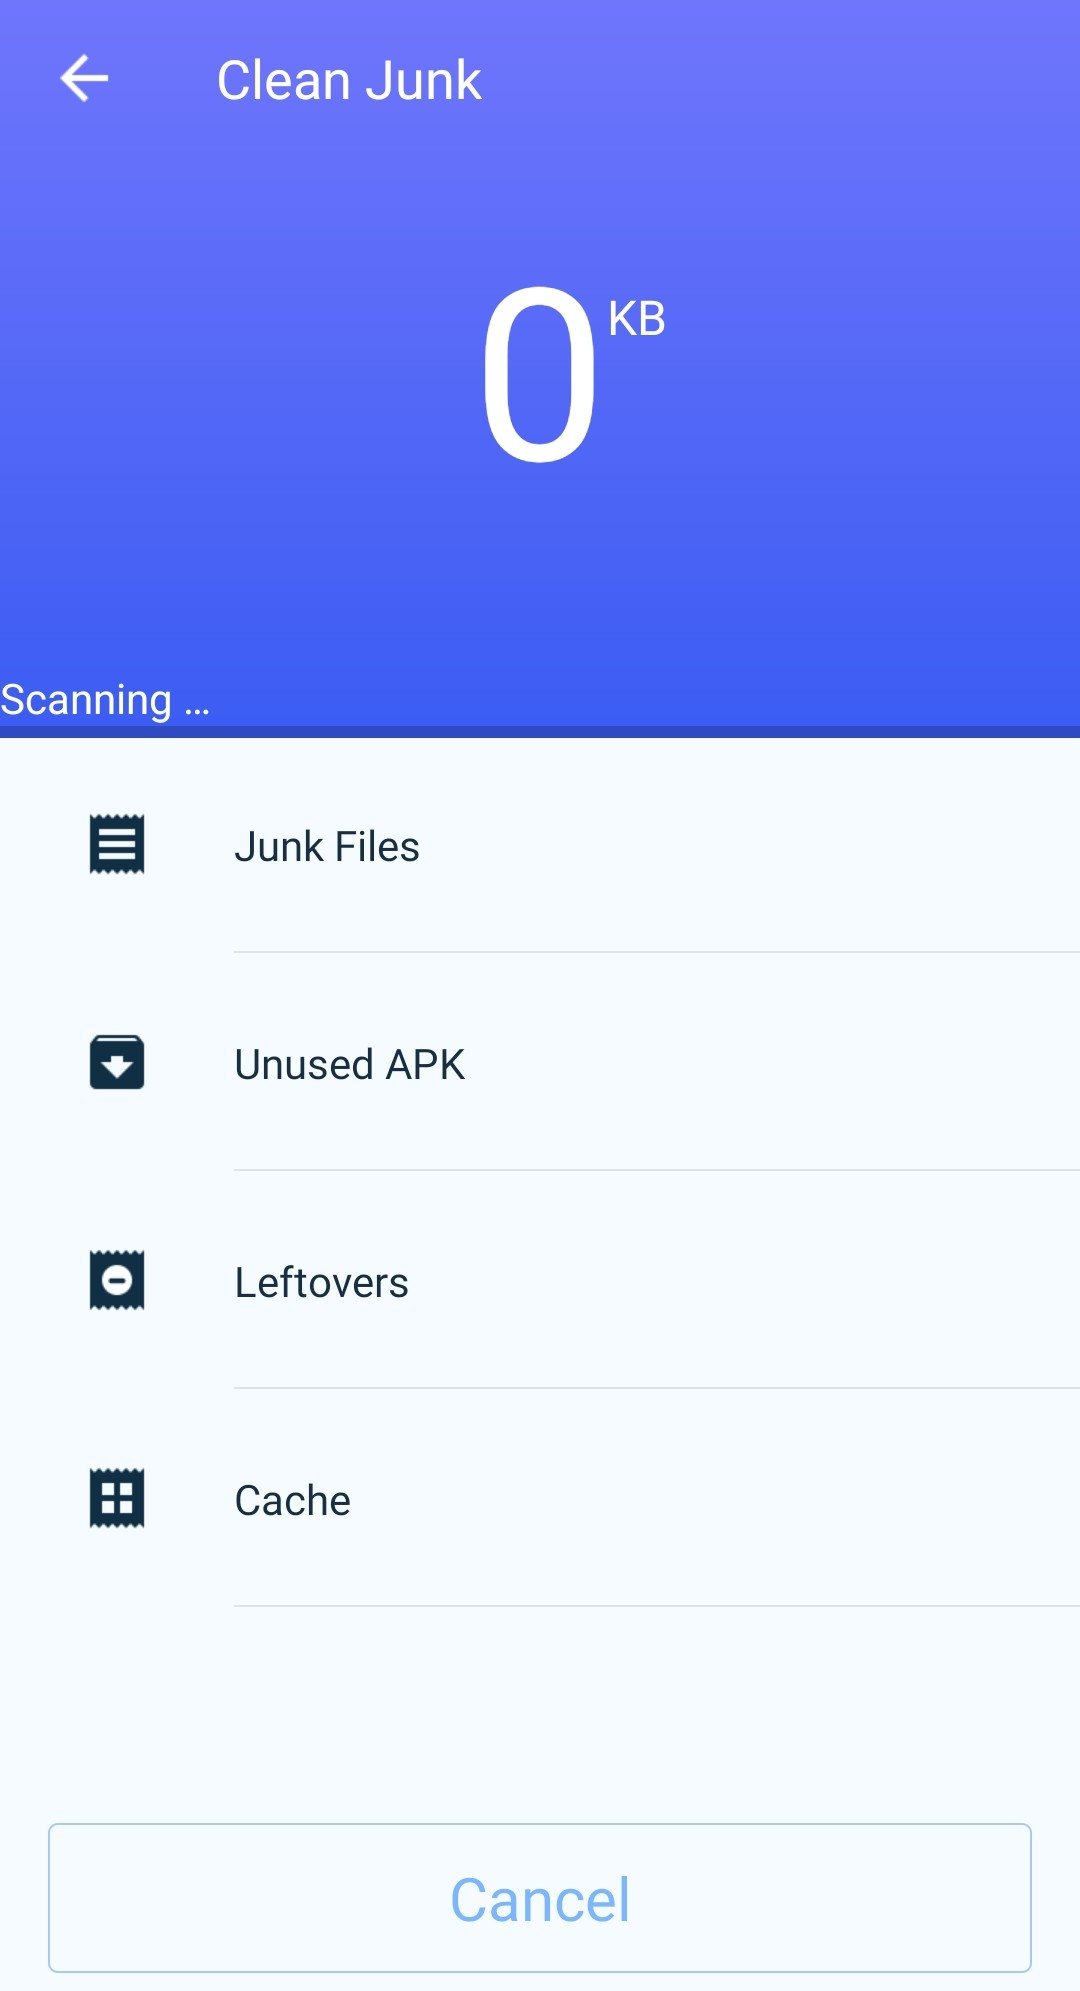 purify app with root: